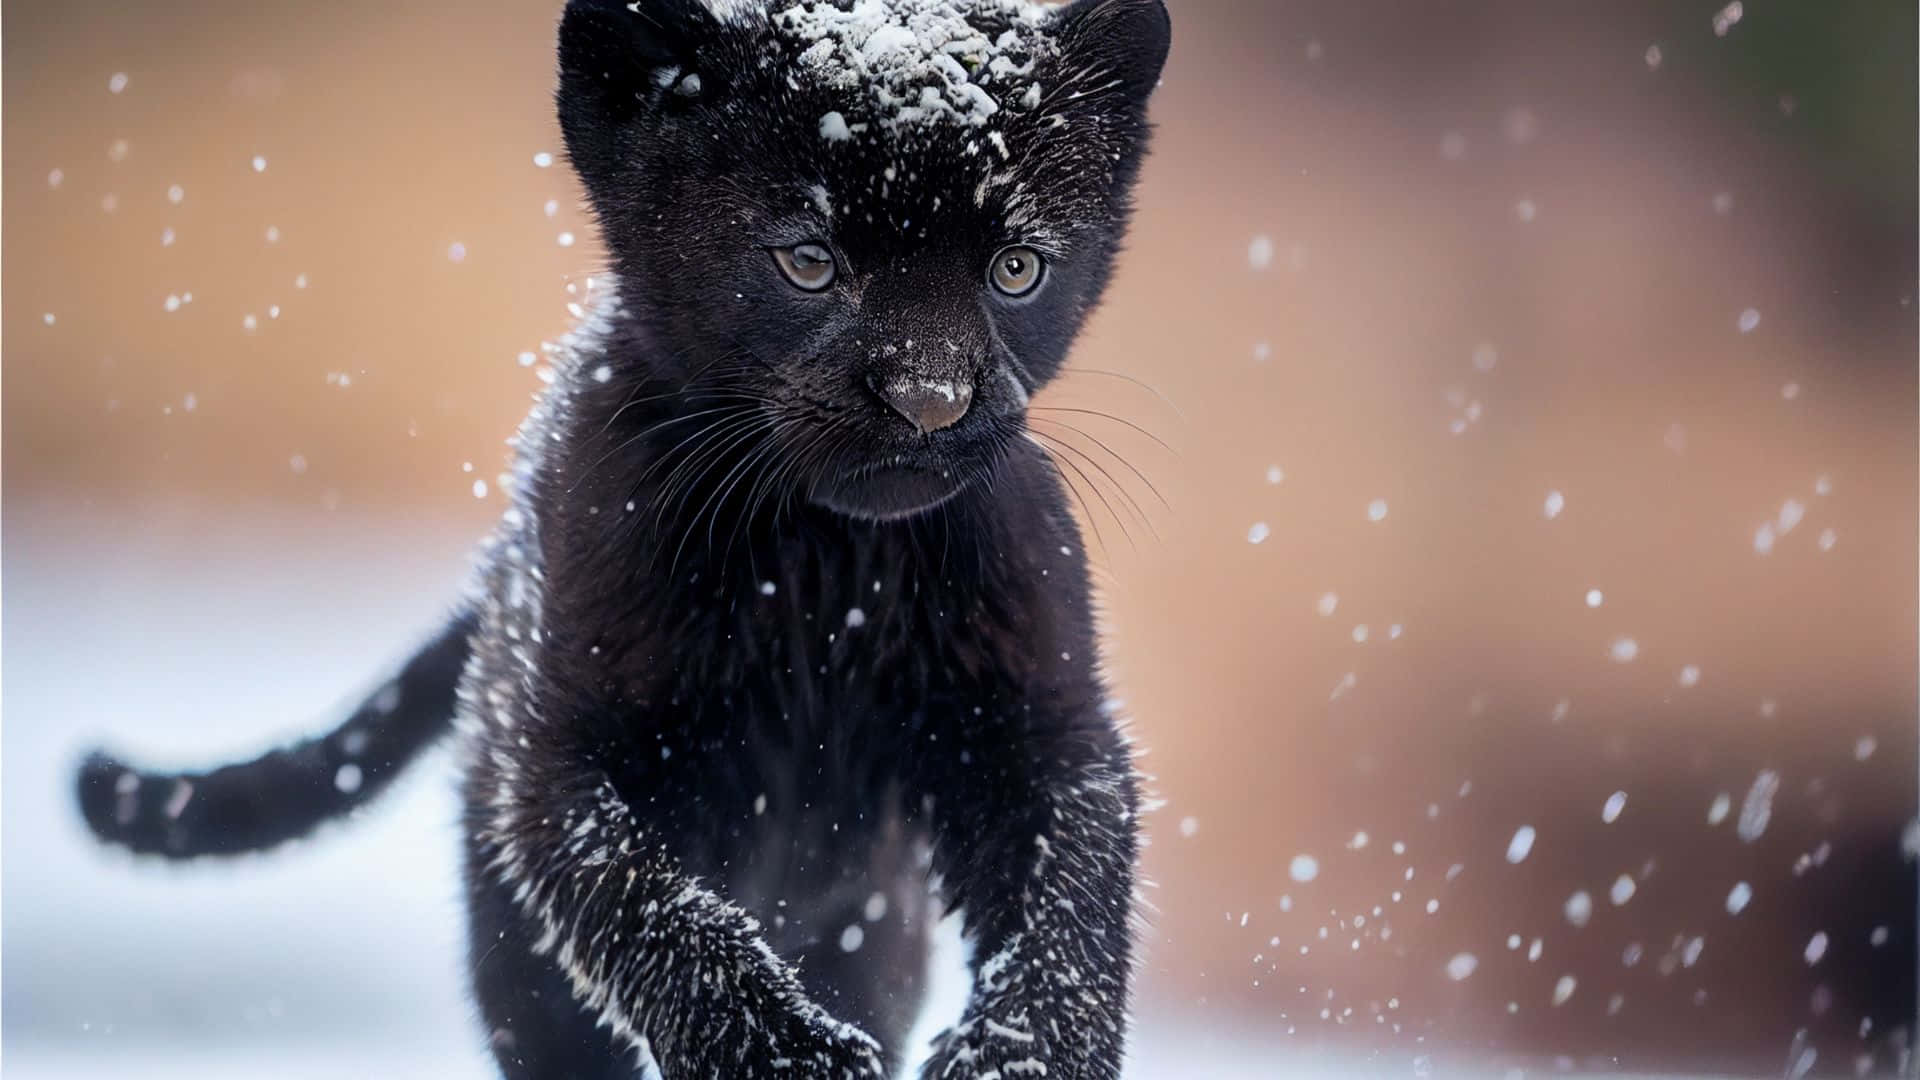 Stunning Black Panther Gazing into the Distance